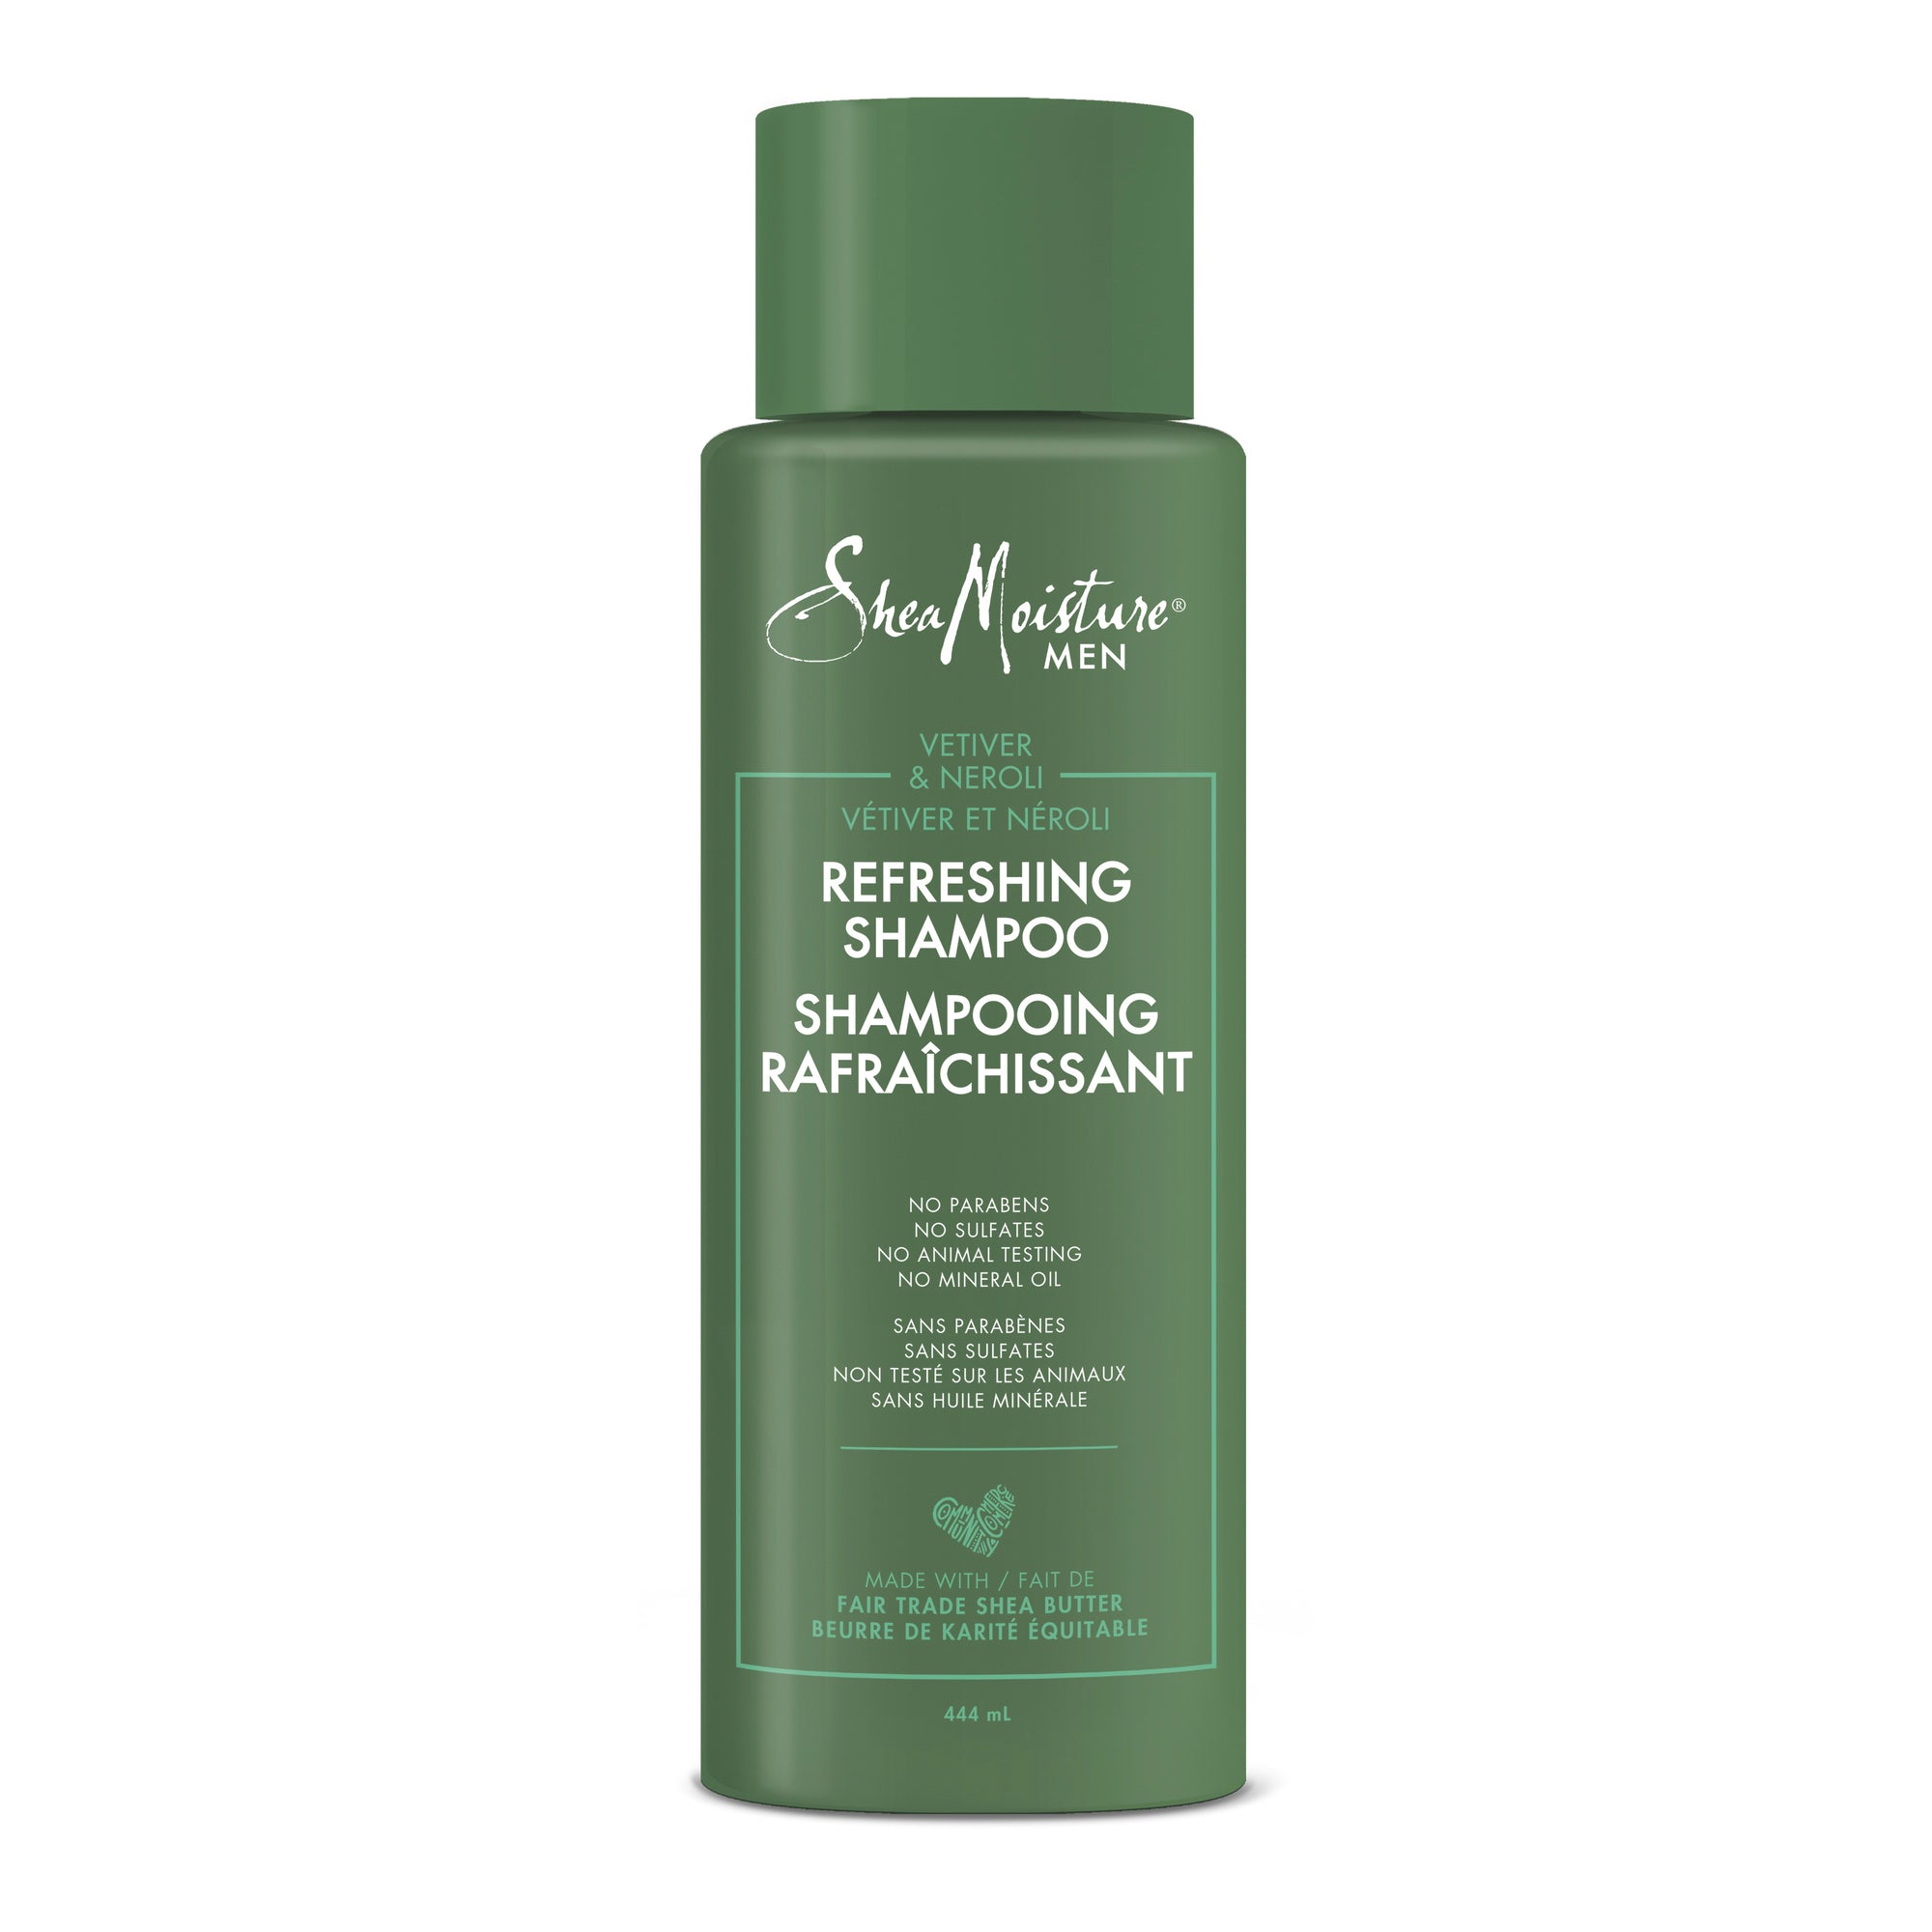 Showing the front angle view of the SheaMoisture Men Refreshing Vetiver & Neroli Shampoo 444mL product.